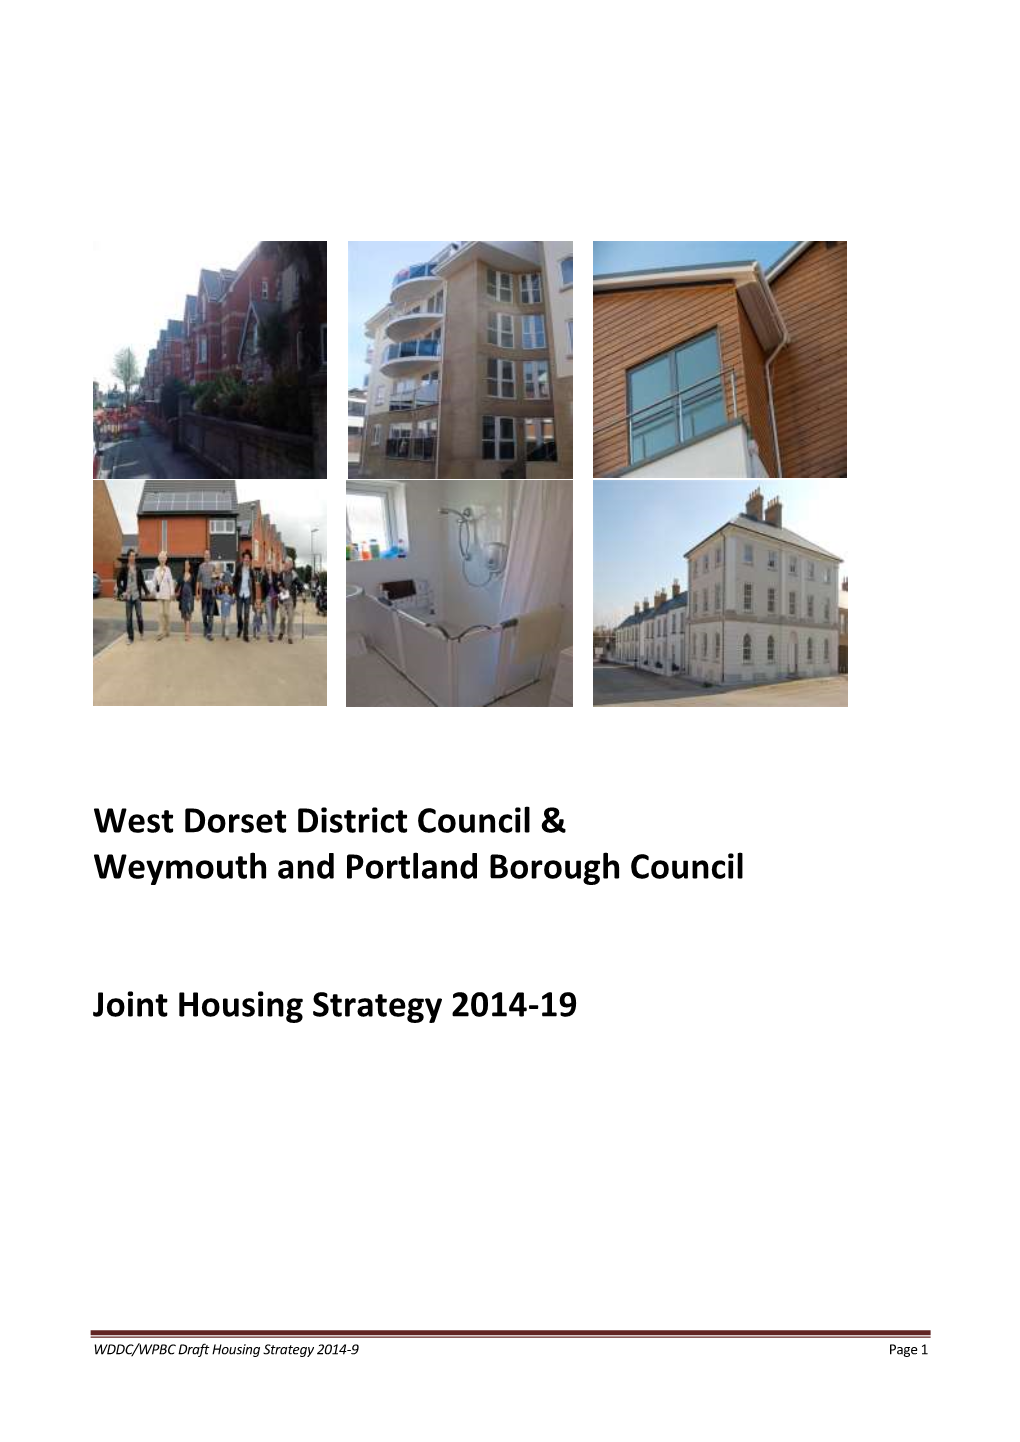 West Dorset District Council & Weymouth and Portland Borough